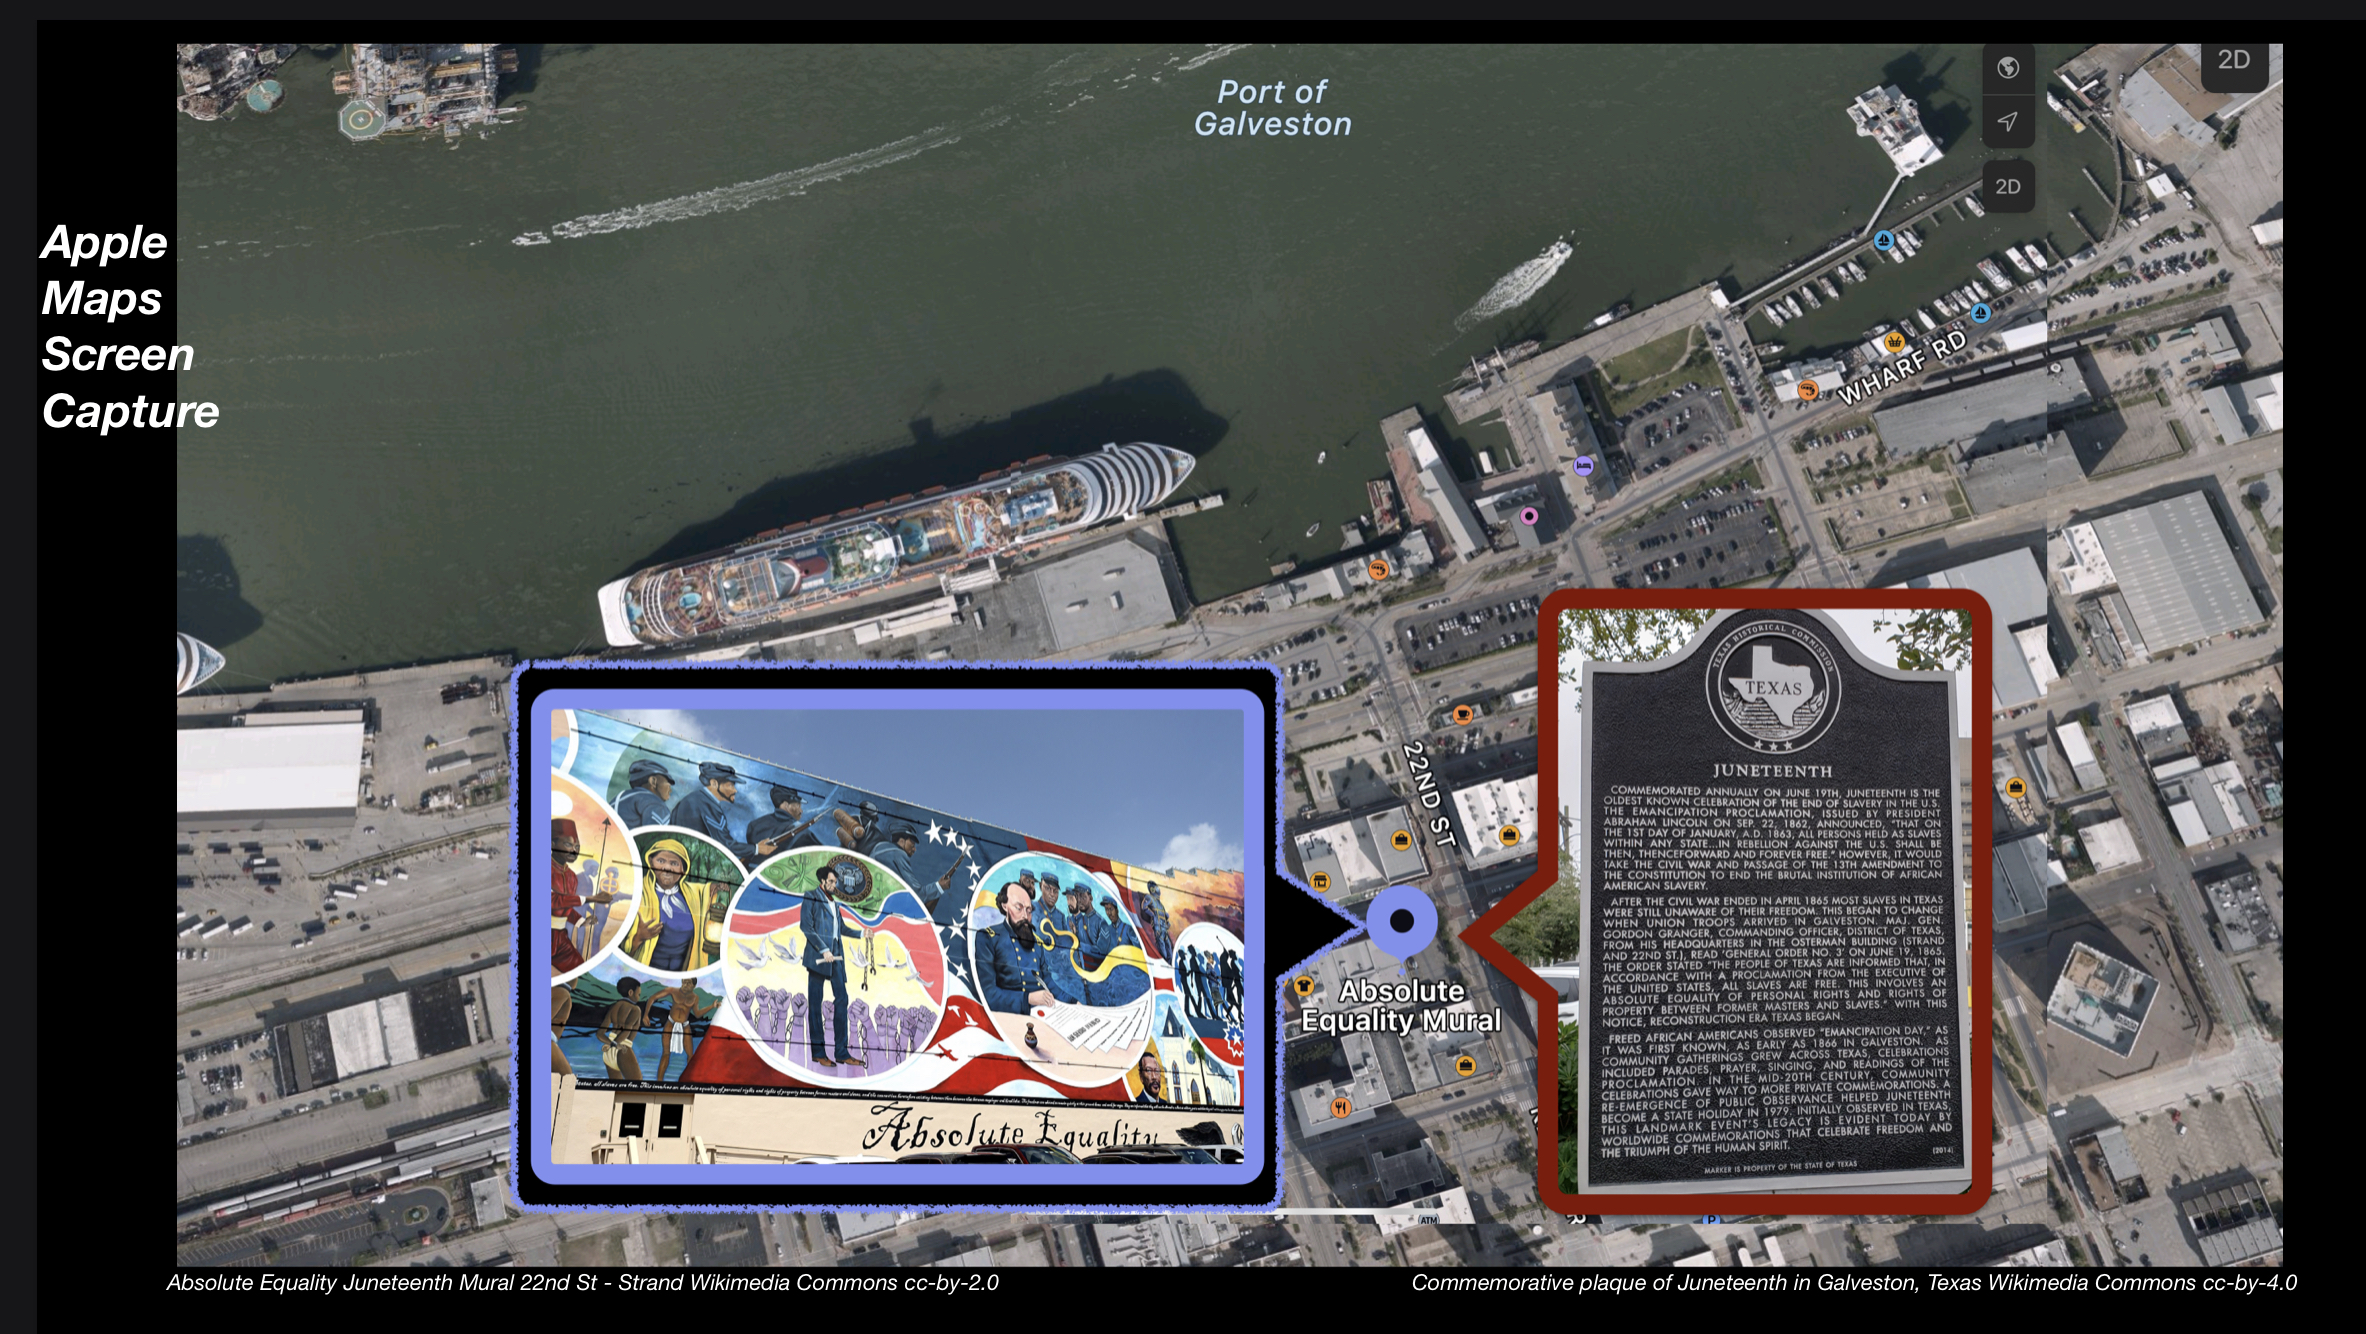 Apple Maps screen shot of location of announcement of the Emancipation Proclamation in Galveston Texas.